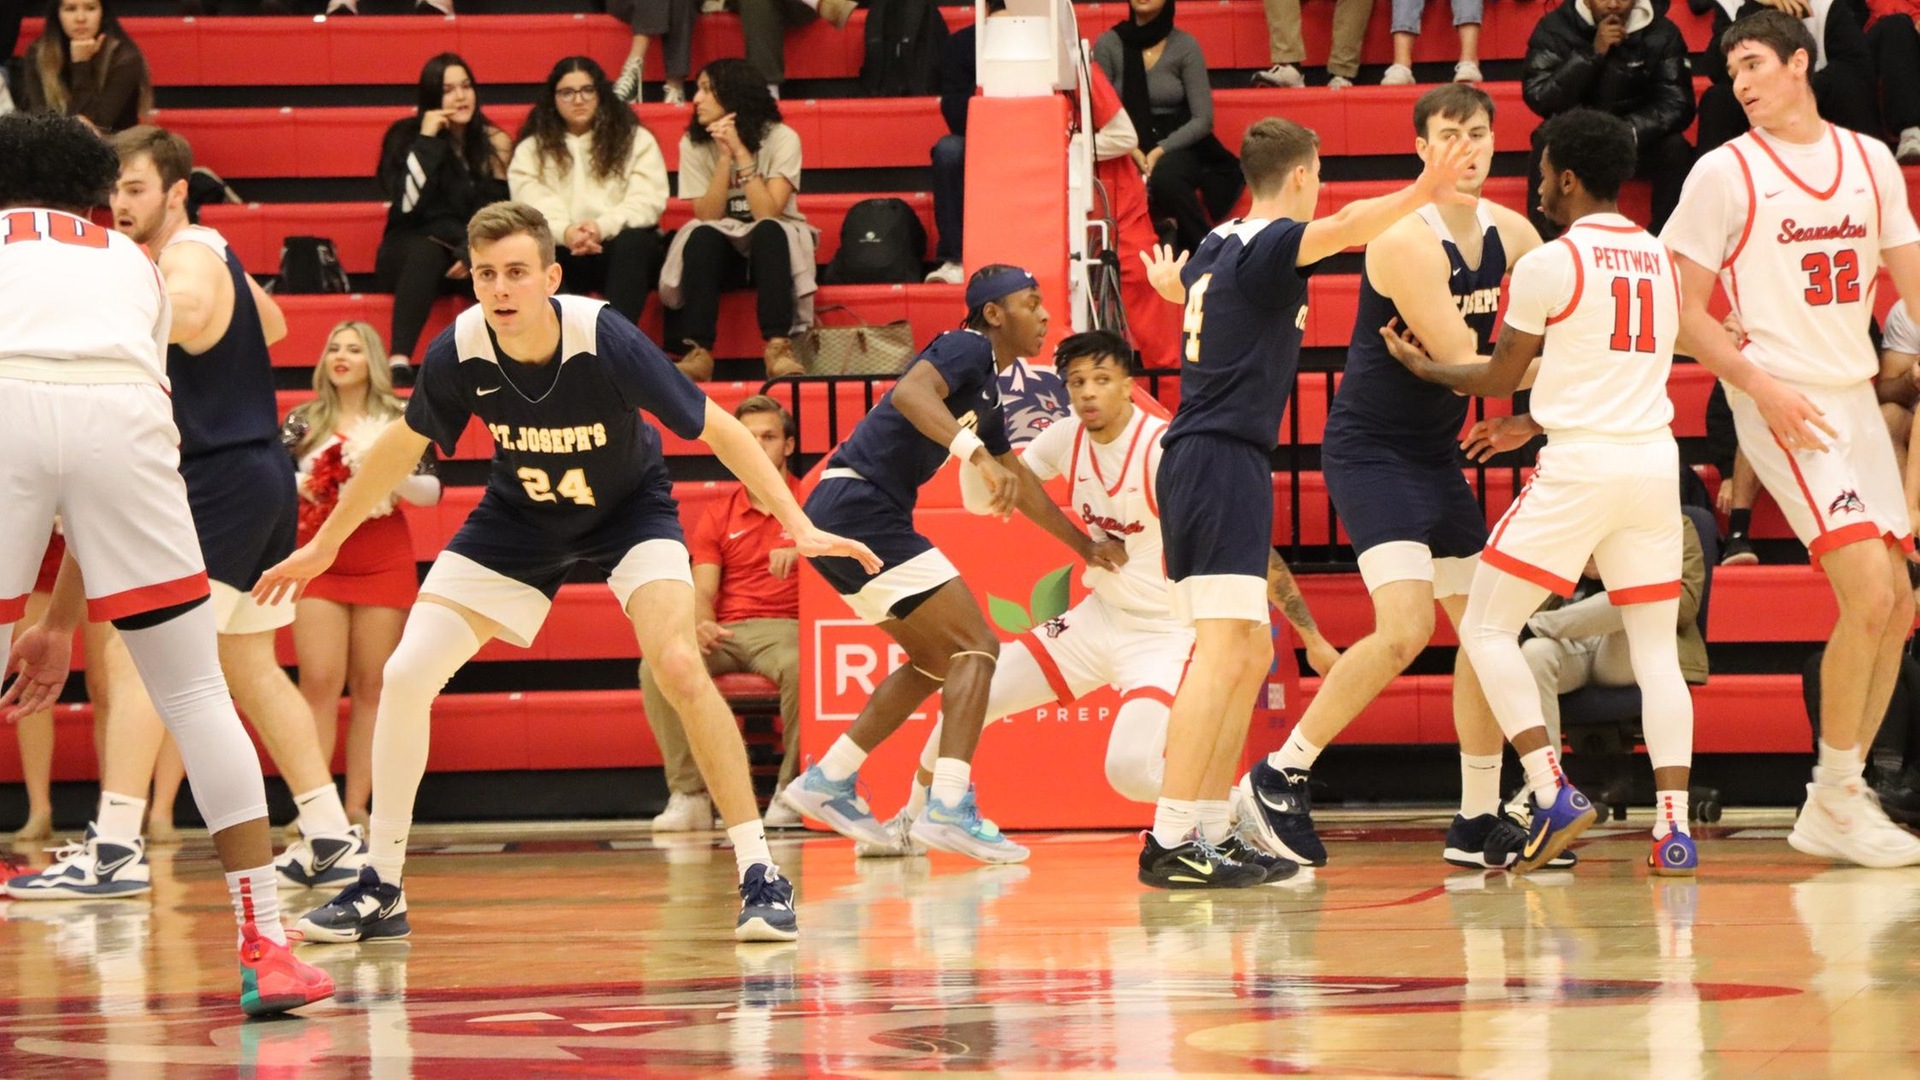 Men's Basketball Competes in Exhibition with Stony Brook